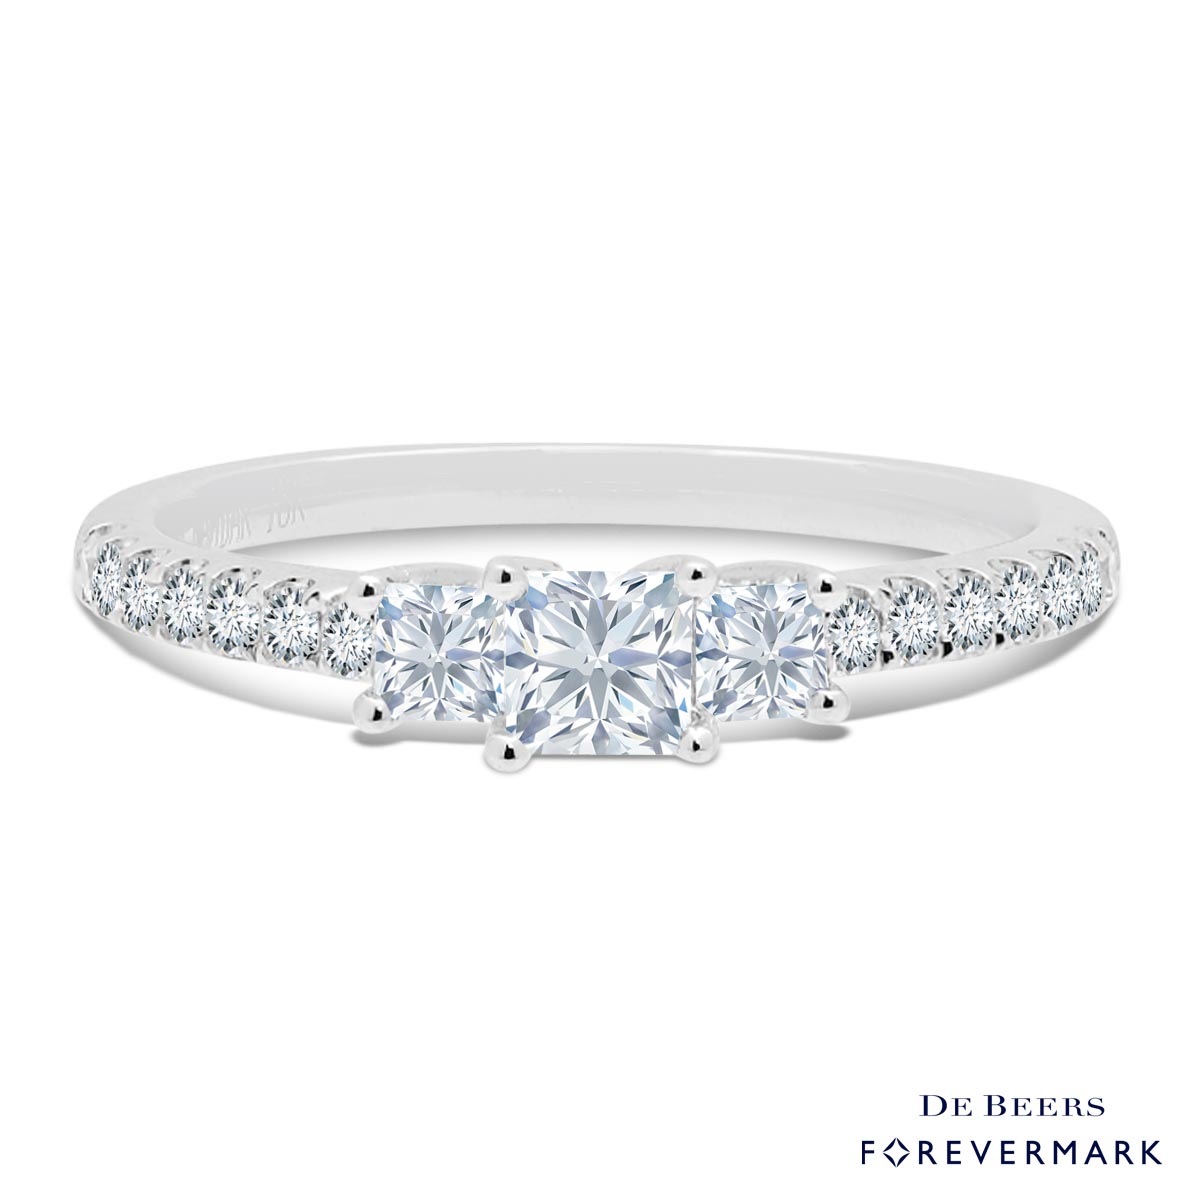 De Beers Forevermark Three Stone Diamond Ring in 18kt White Gold (5/8ct tw)